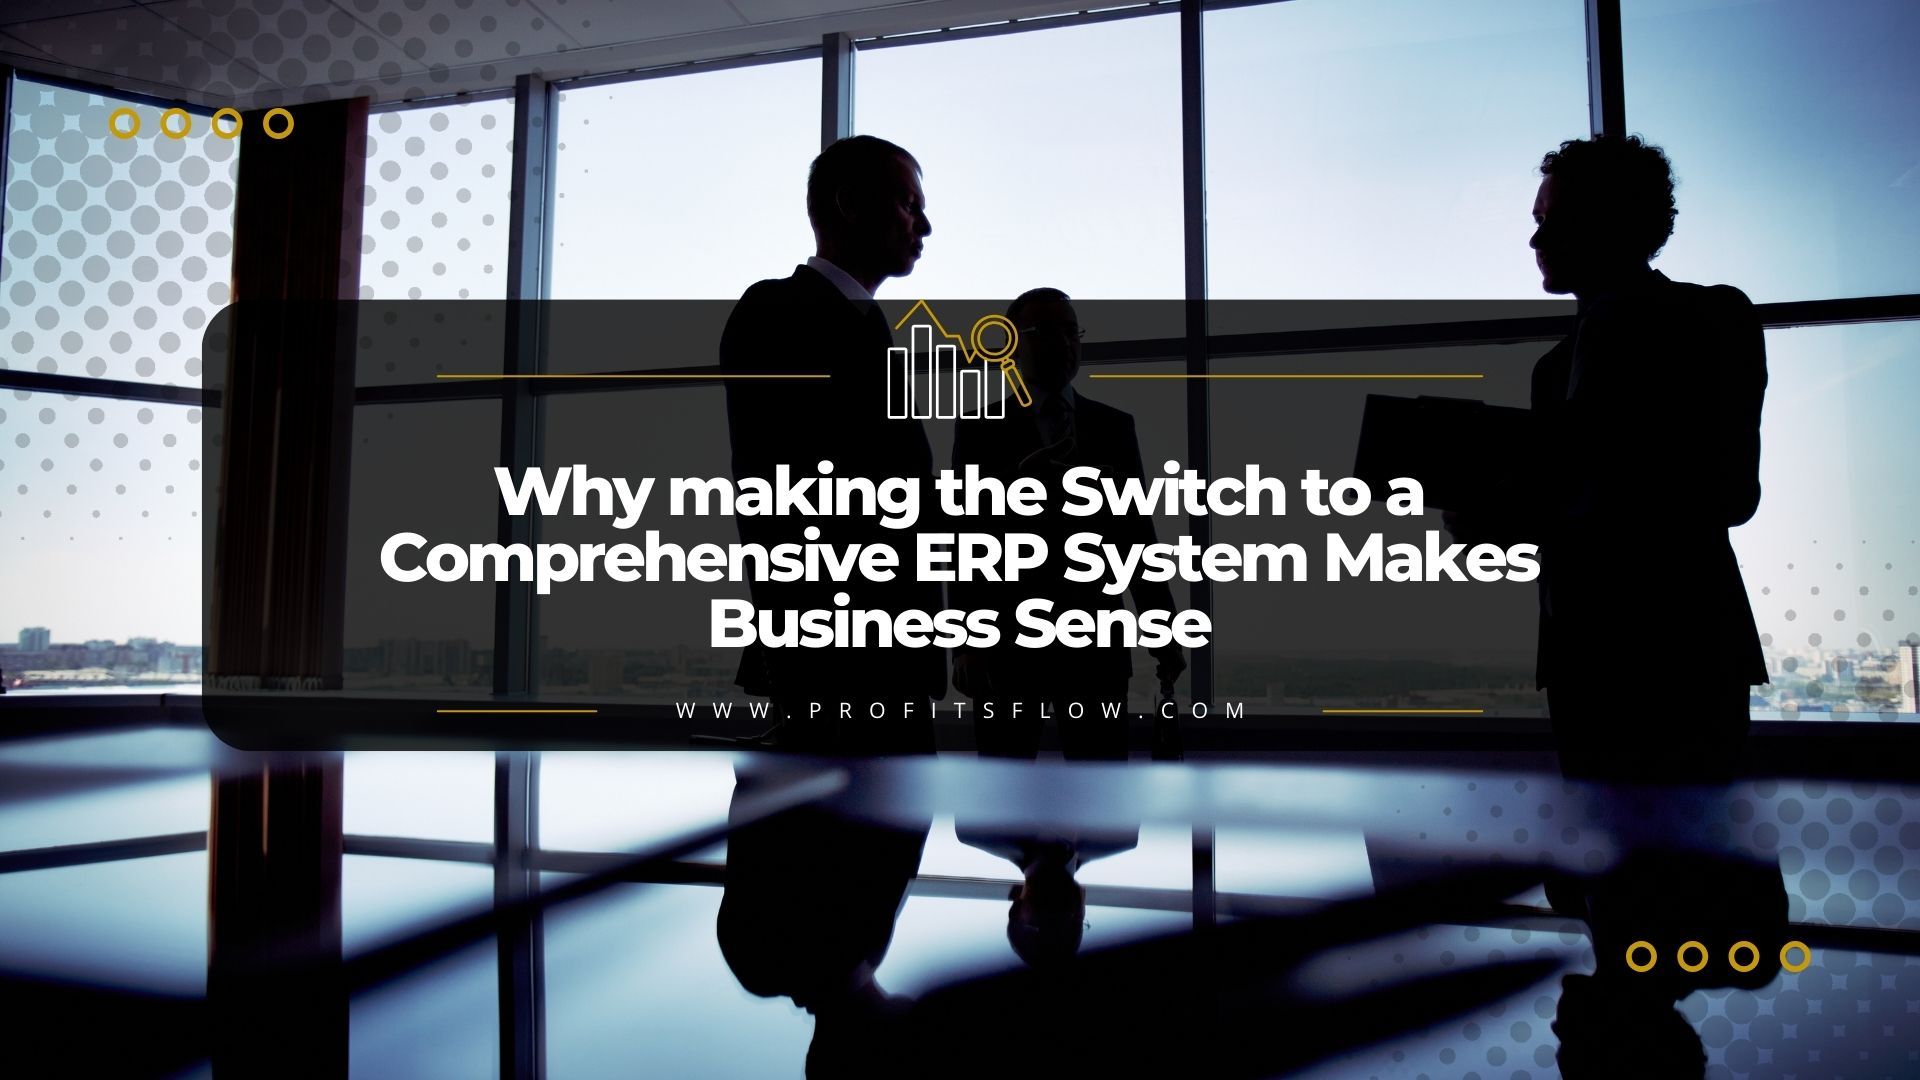 Why making the Switch to a Comprehensive ERP System Makes Business Sense